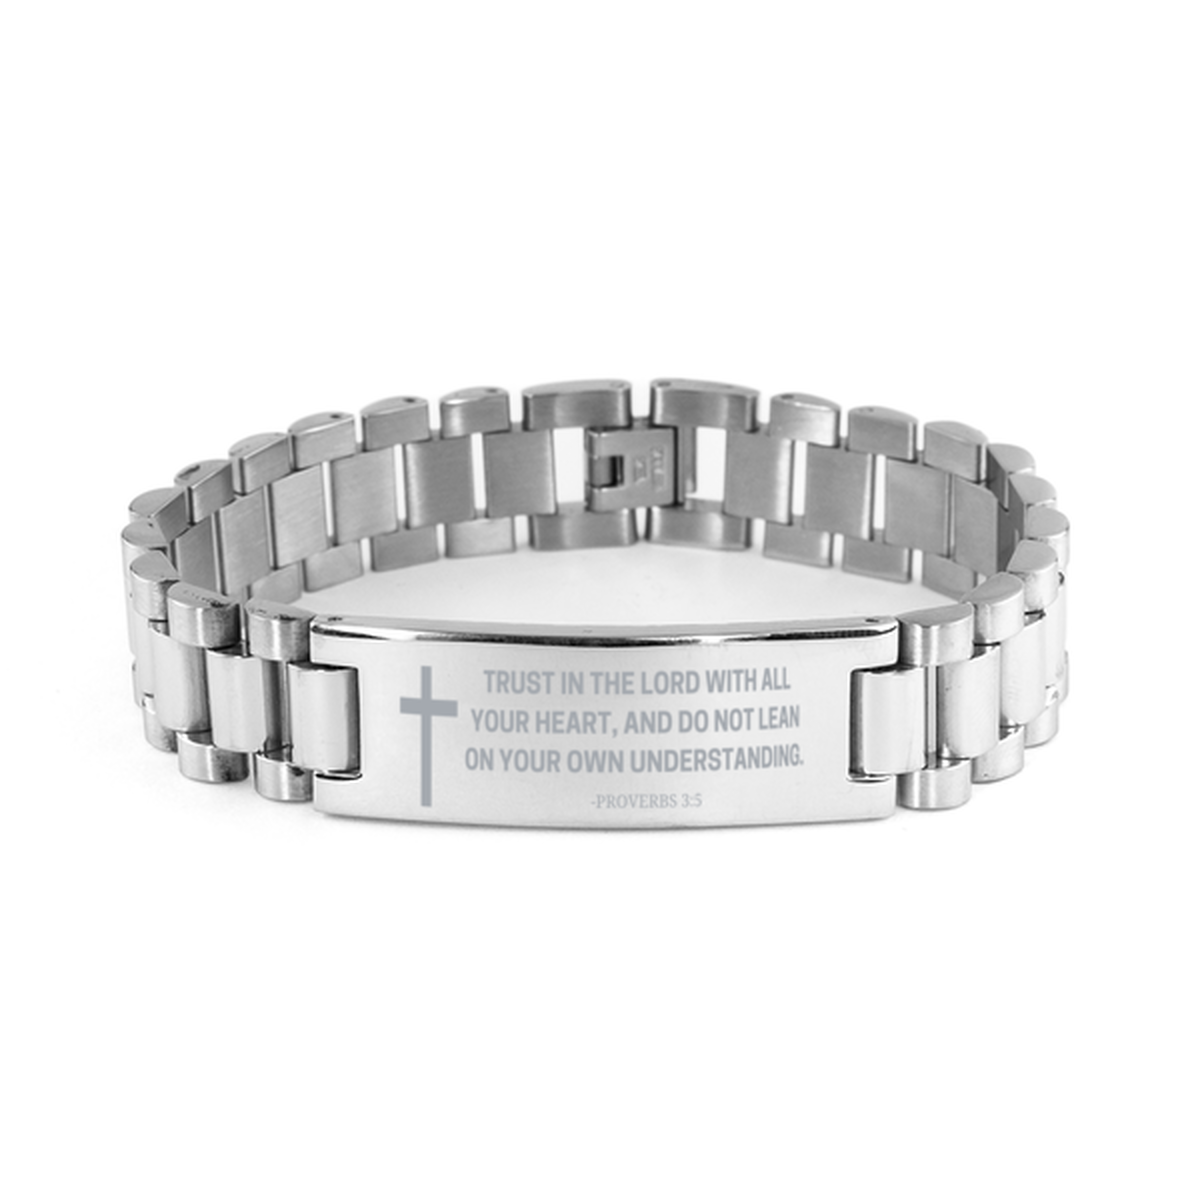 Baptism Gifts For Teenage Boys Girls, Christian Bible Verse Ladder Stainless Steel Bracelet, Trust in the Lord with all your heart, Catholic Confirmation Gifts for Son, Godson, Grandson, Nephew